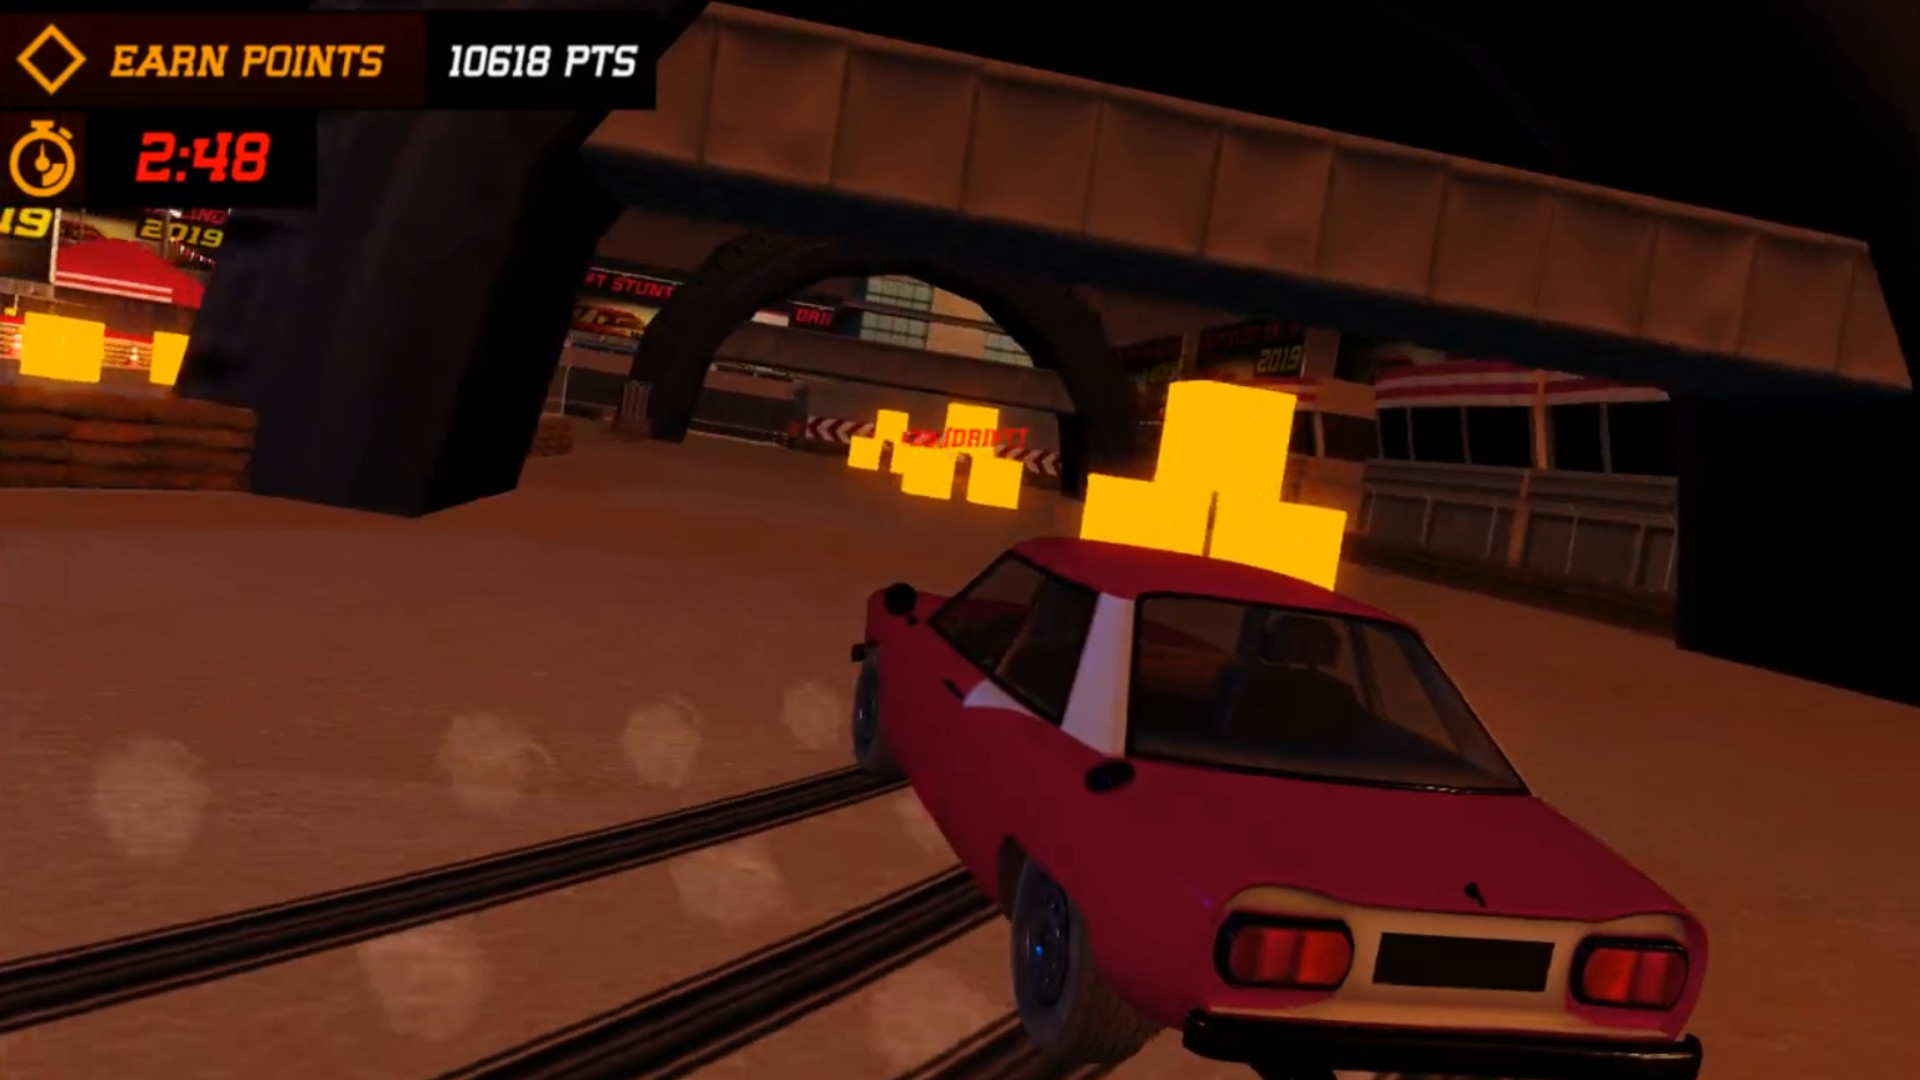 Drift Stunt Racing 2019 Free Download for PC